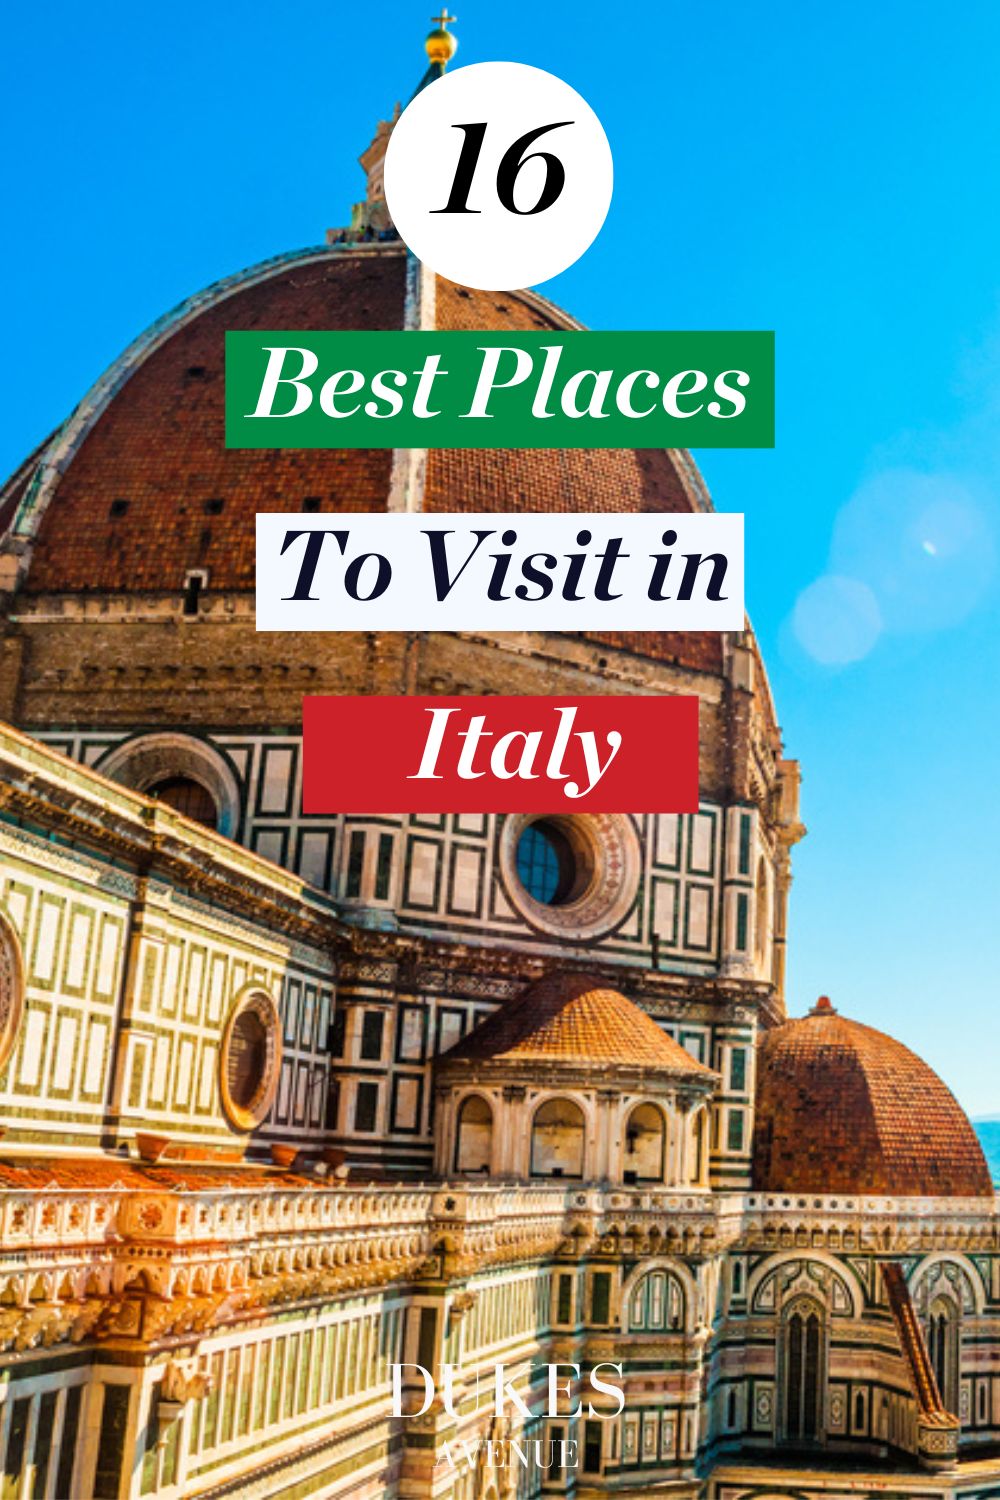 Image of church in Italy with text overlay '16 Best Places to Visit in Italy'